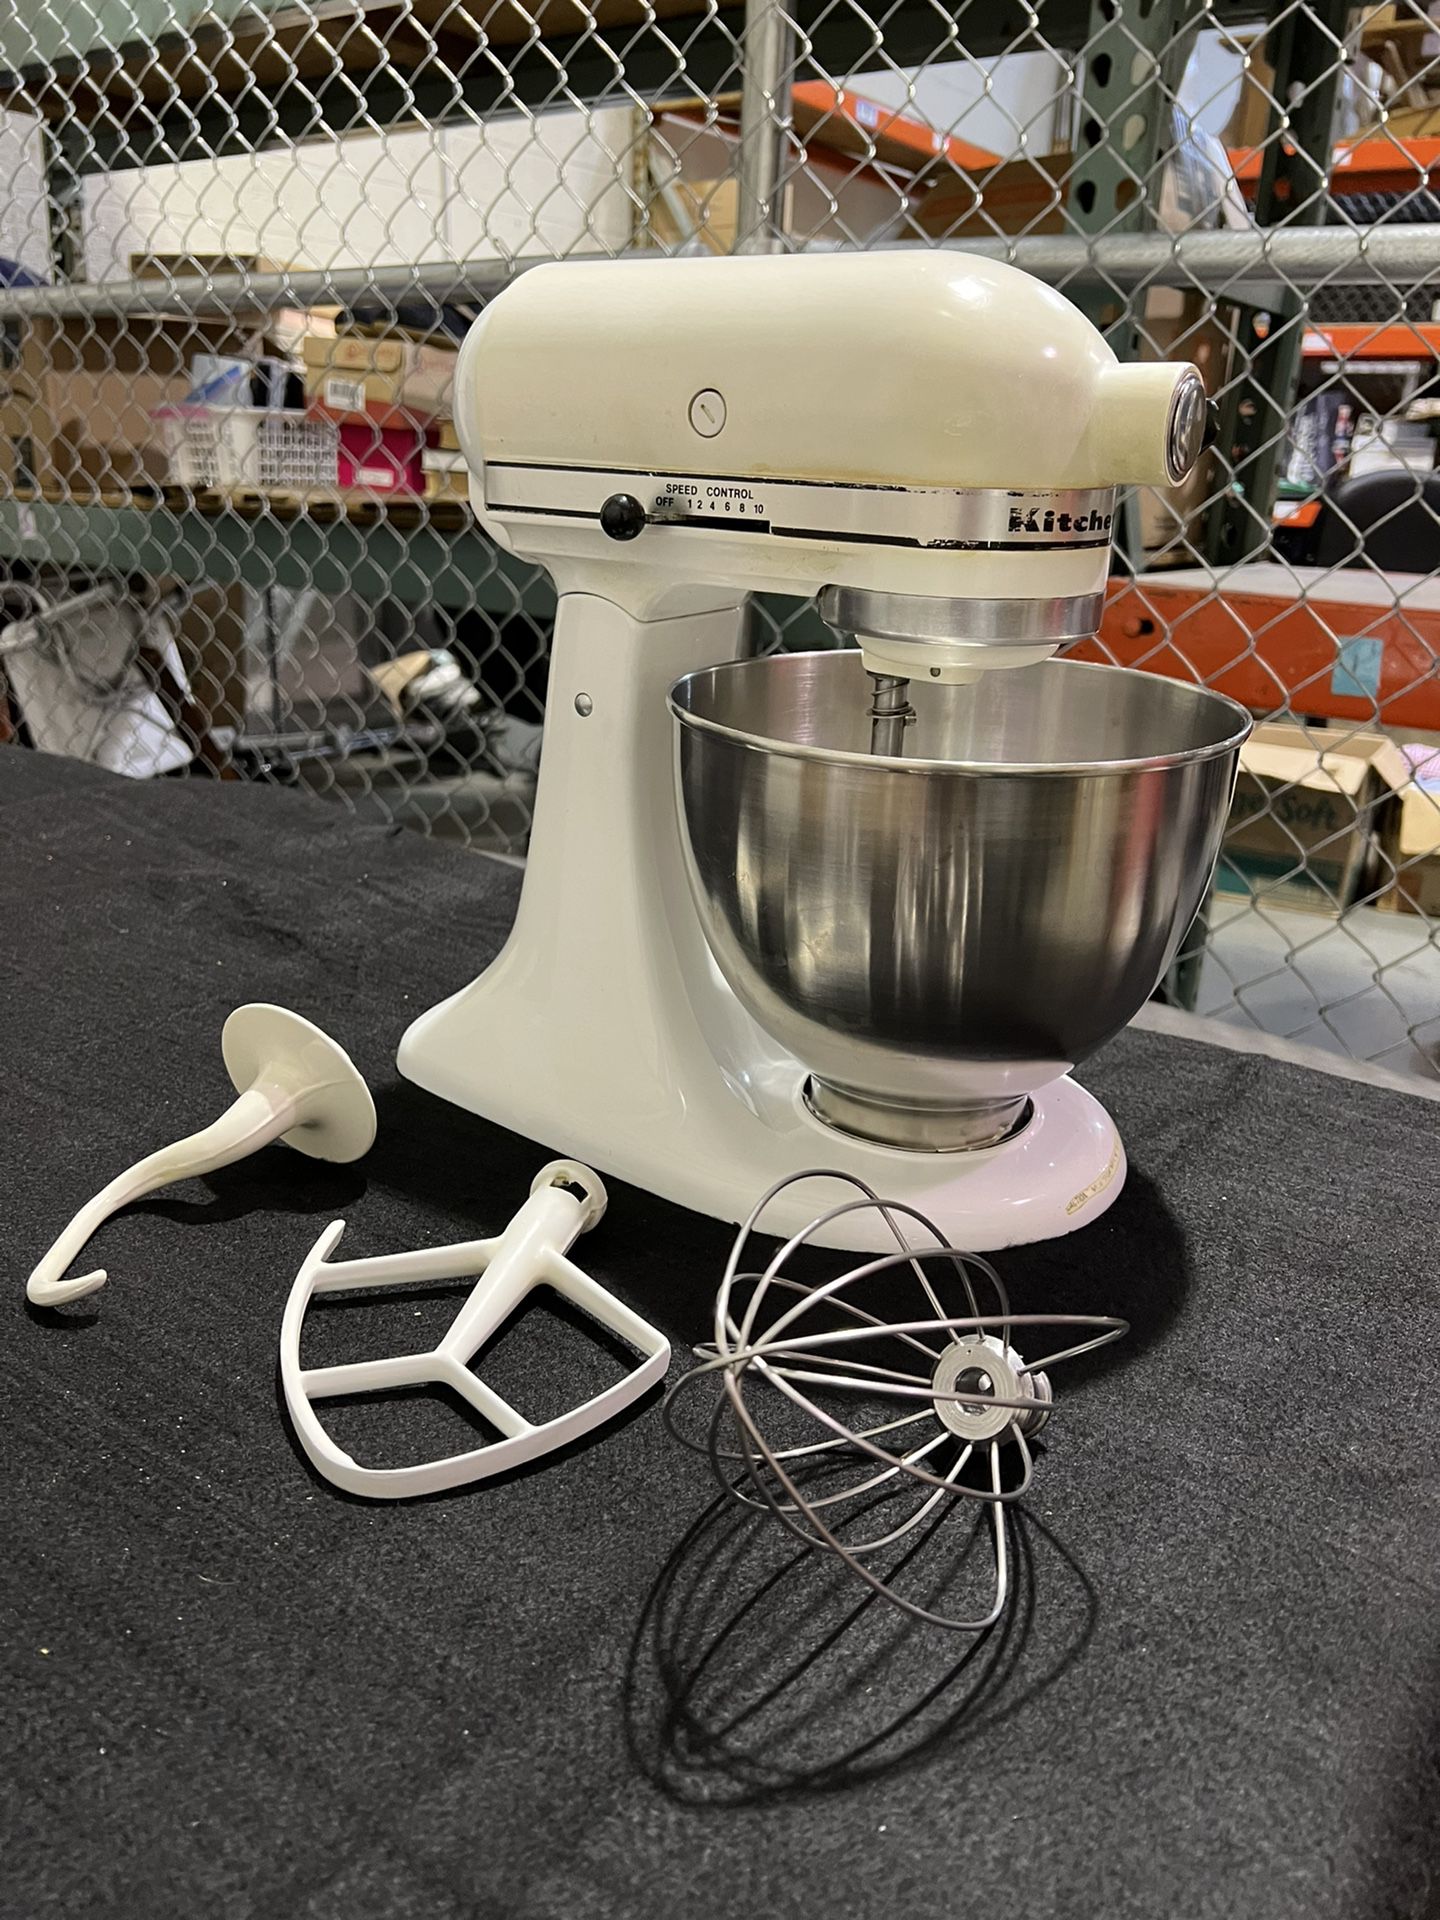 Ampere Supermarked Indskrive Vintage Kitchenaid K45 10 Speed Stand Mixer White 250 Watt W/Bowl +  Attachments for Sale in Portland, OR - OfferUp